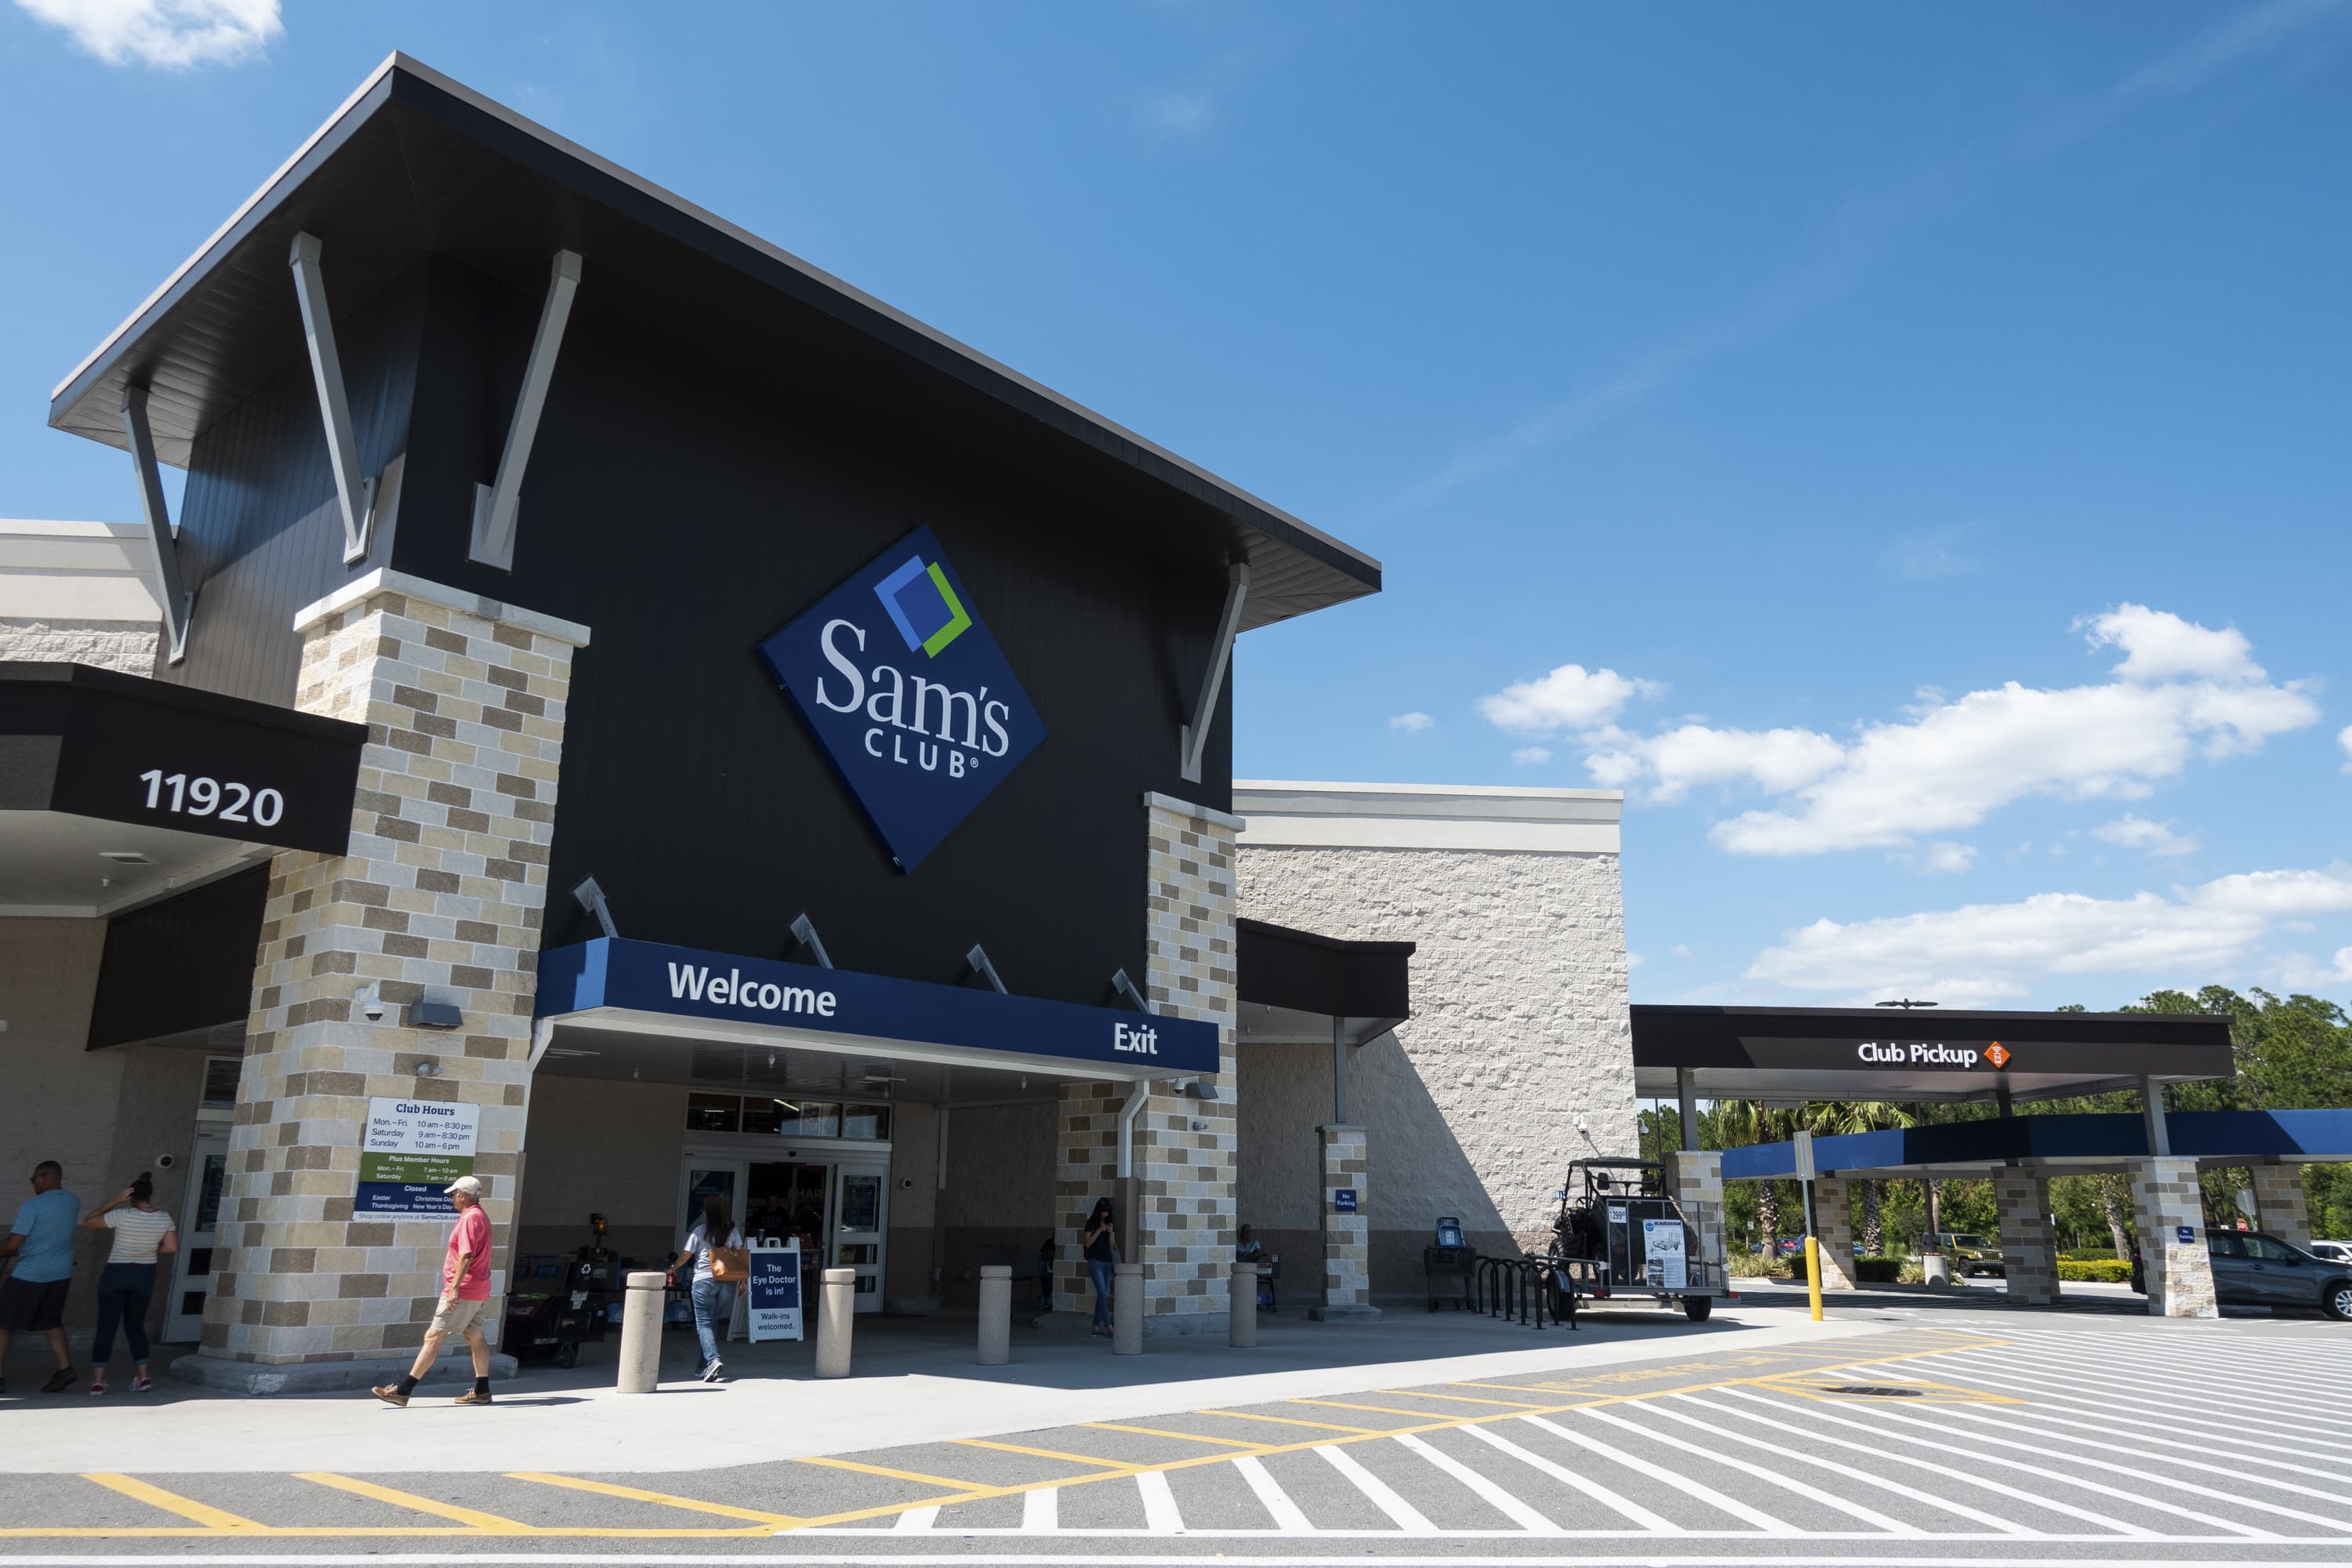 Sam's Club - Check it out Sam's club members!! Marie is getting